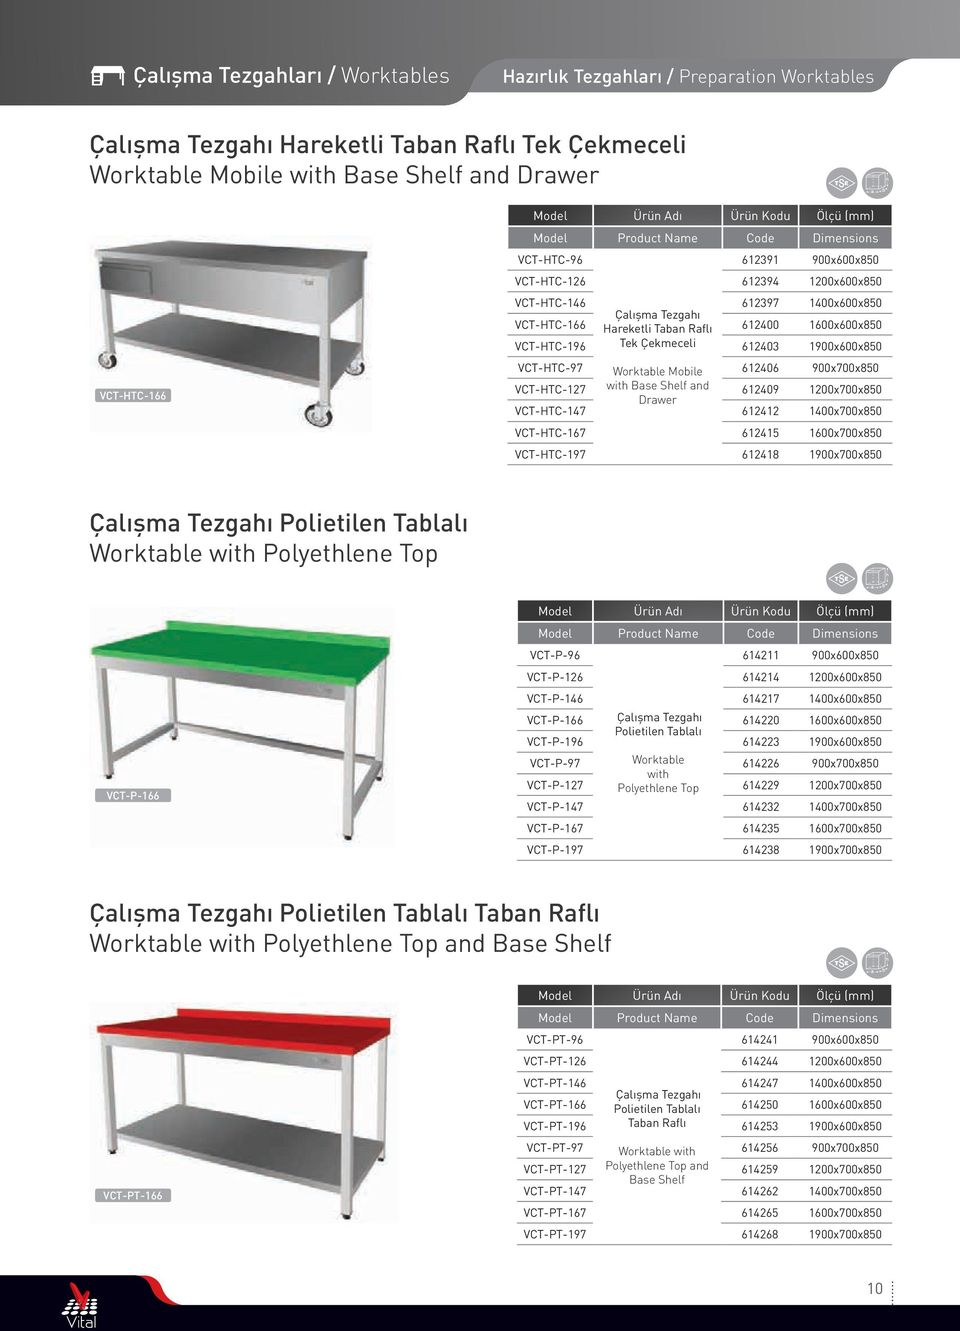 VCT-HTC-97 Worktable Mobile 612406 900x700x850 VCT-HTC-127 with Base Shelf and Drawer 612409 1200x700x850 VCT-HTC-147 612412 1400x700x850 VCT-HTC-167 612415 1600x700x850 VCT-HTC-197 612418